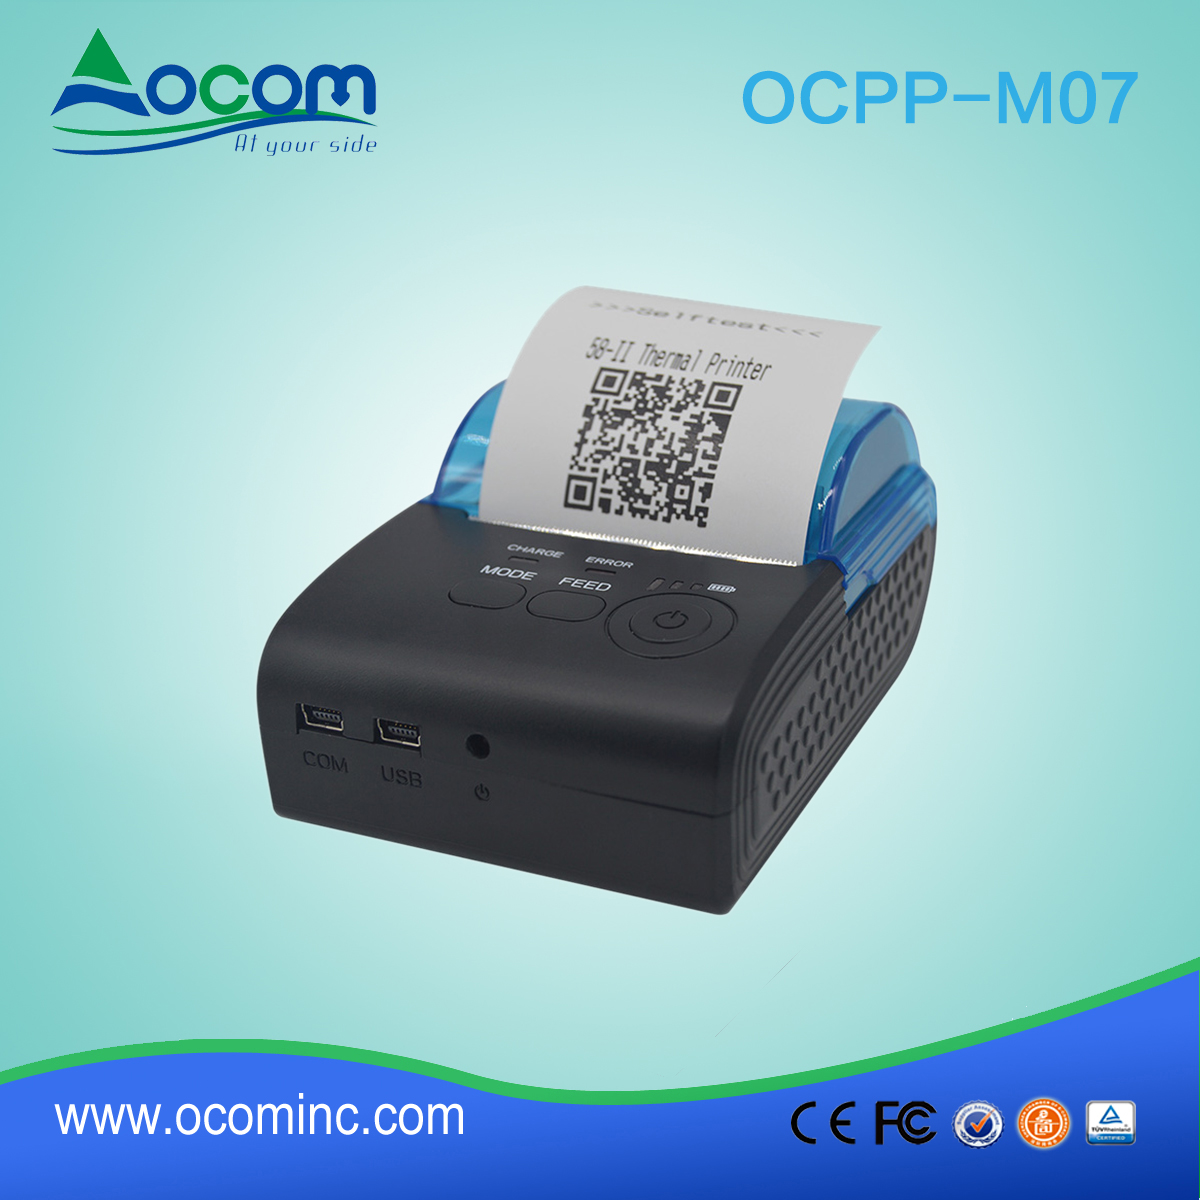 OCPP-M07 58mm Bluetooth Mini Mobile Thermal Receipt Printer for IOS/ Android